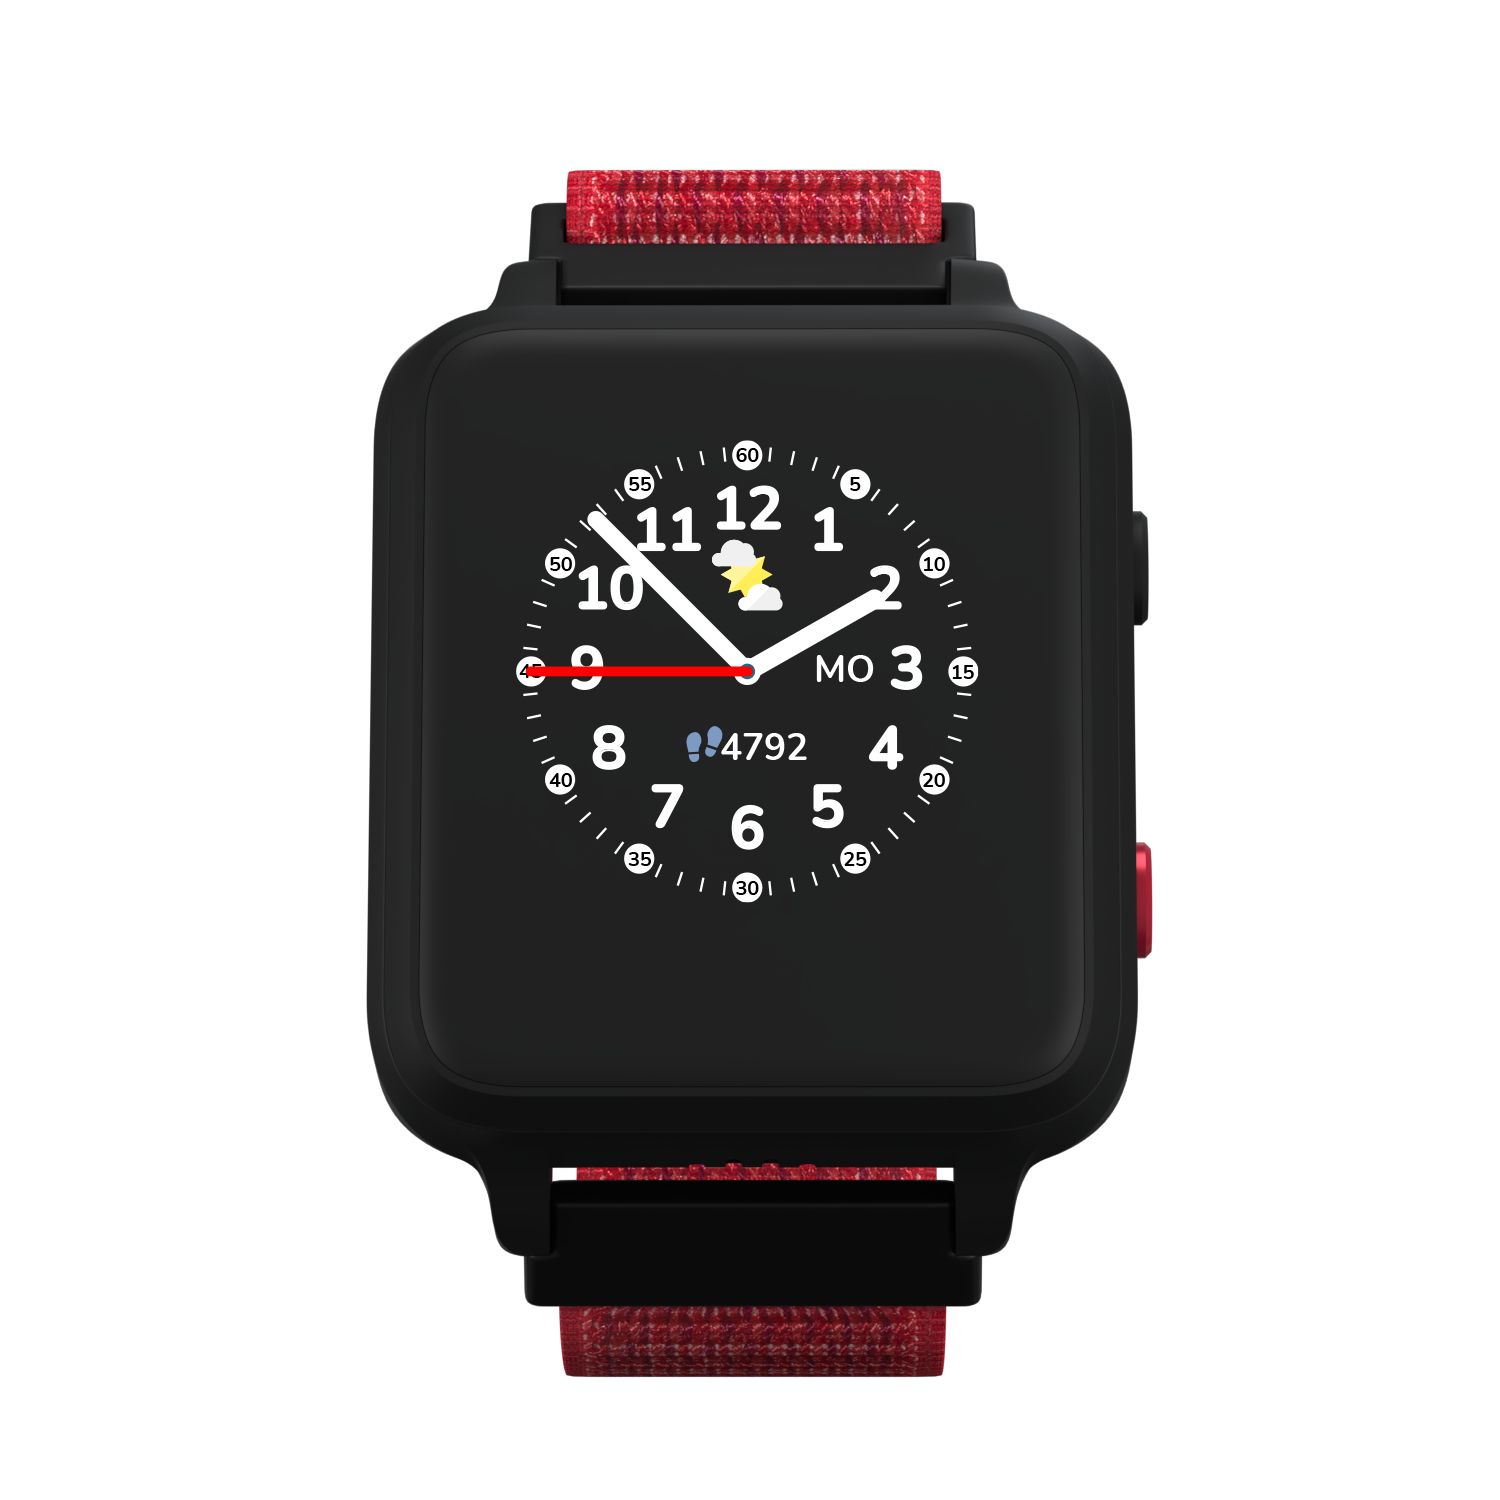 ANIO 5s Kinder Smartwatch Uhr Rot GPS Ortung 6+ Jahre Android LCD Display